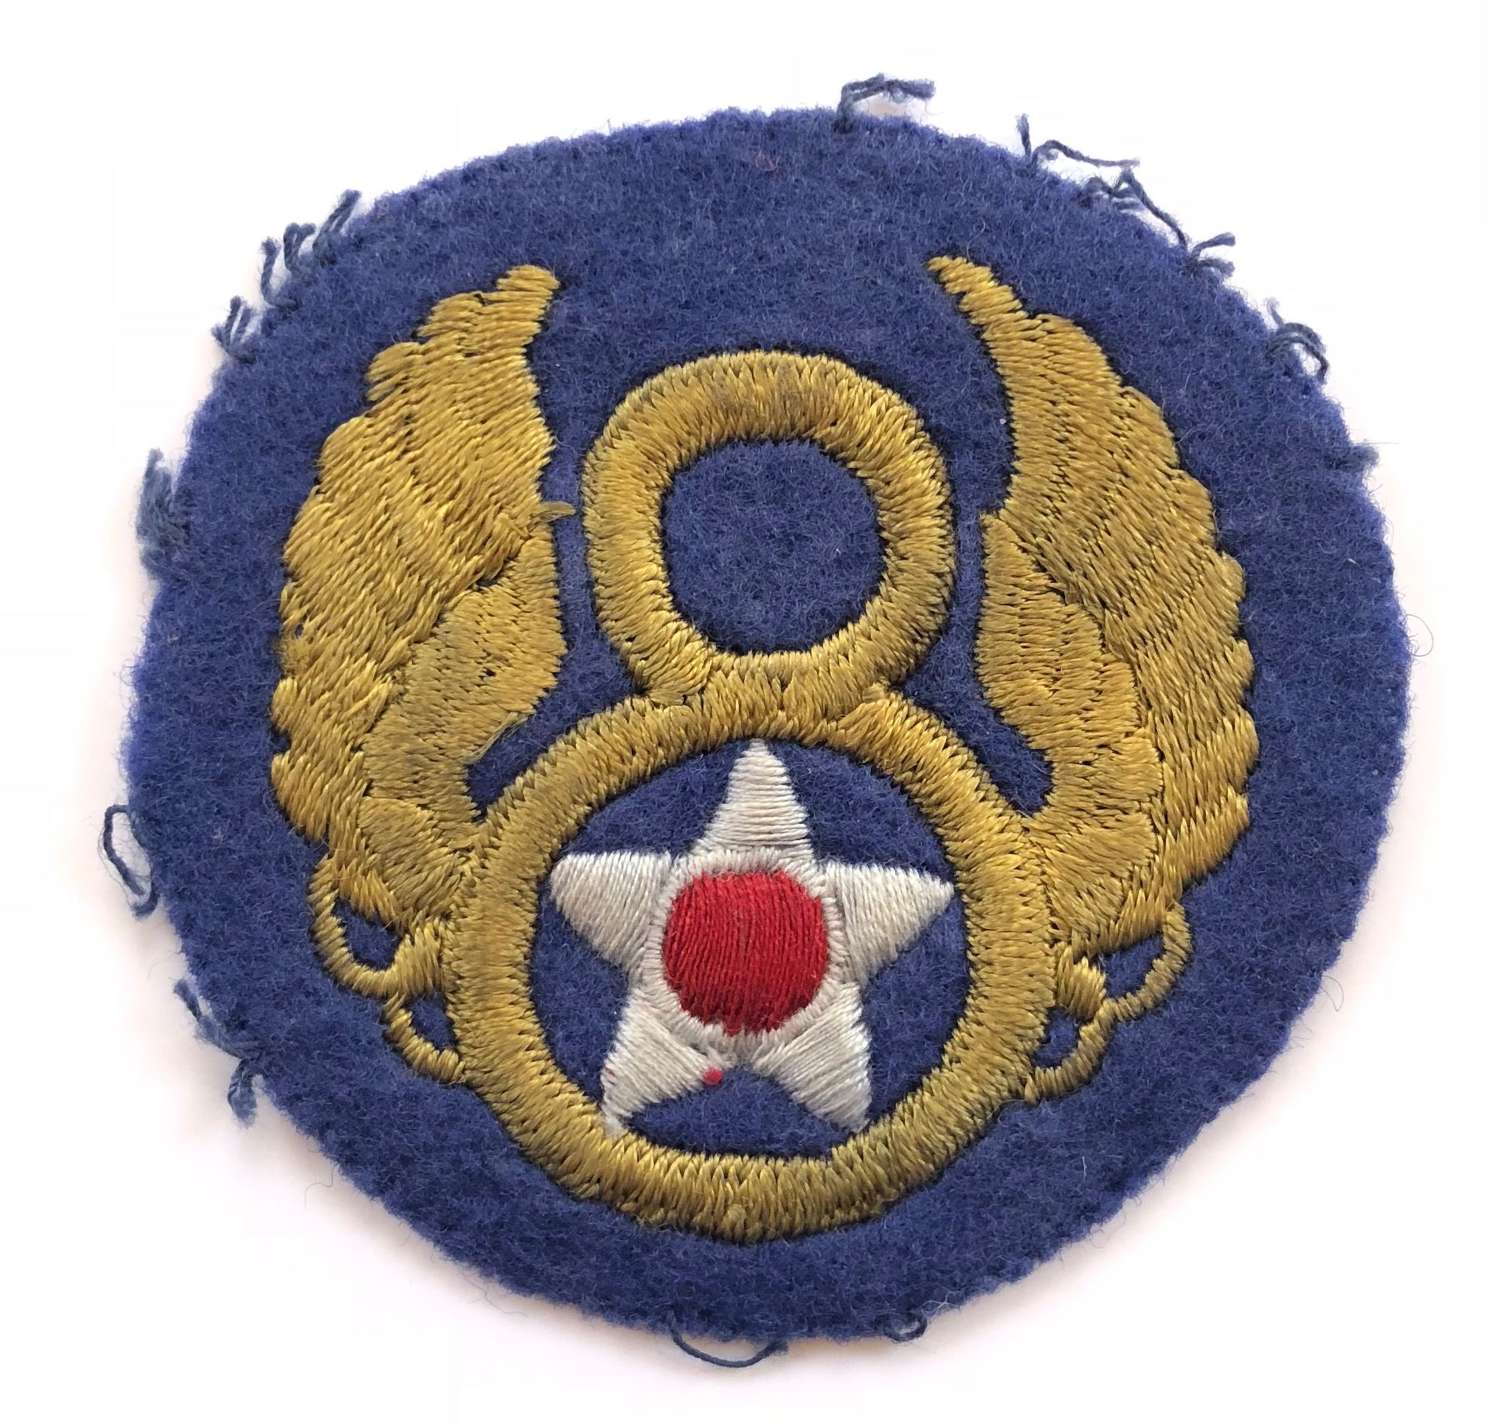 WW2 US 8th Airforce Shoulder Patch Badge.